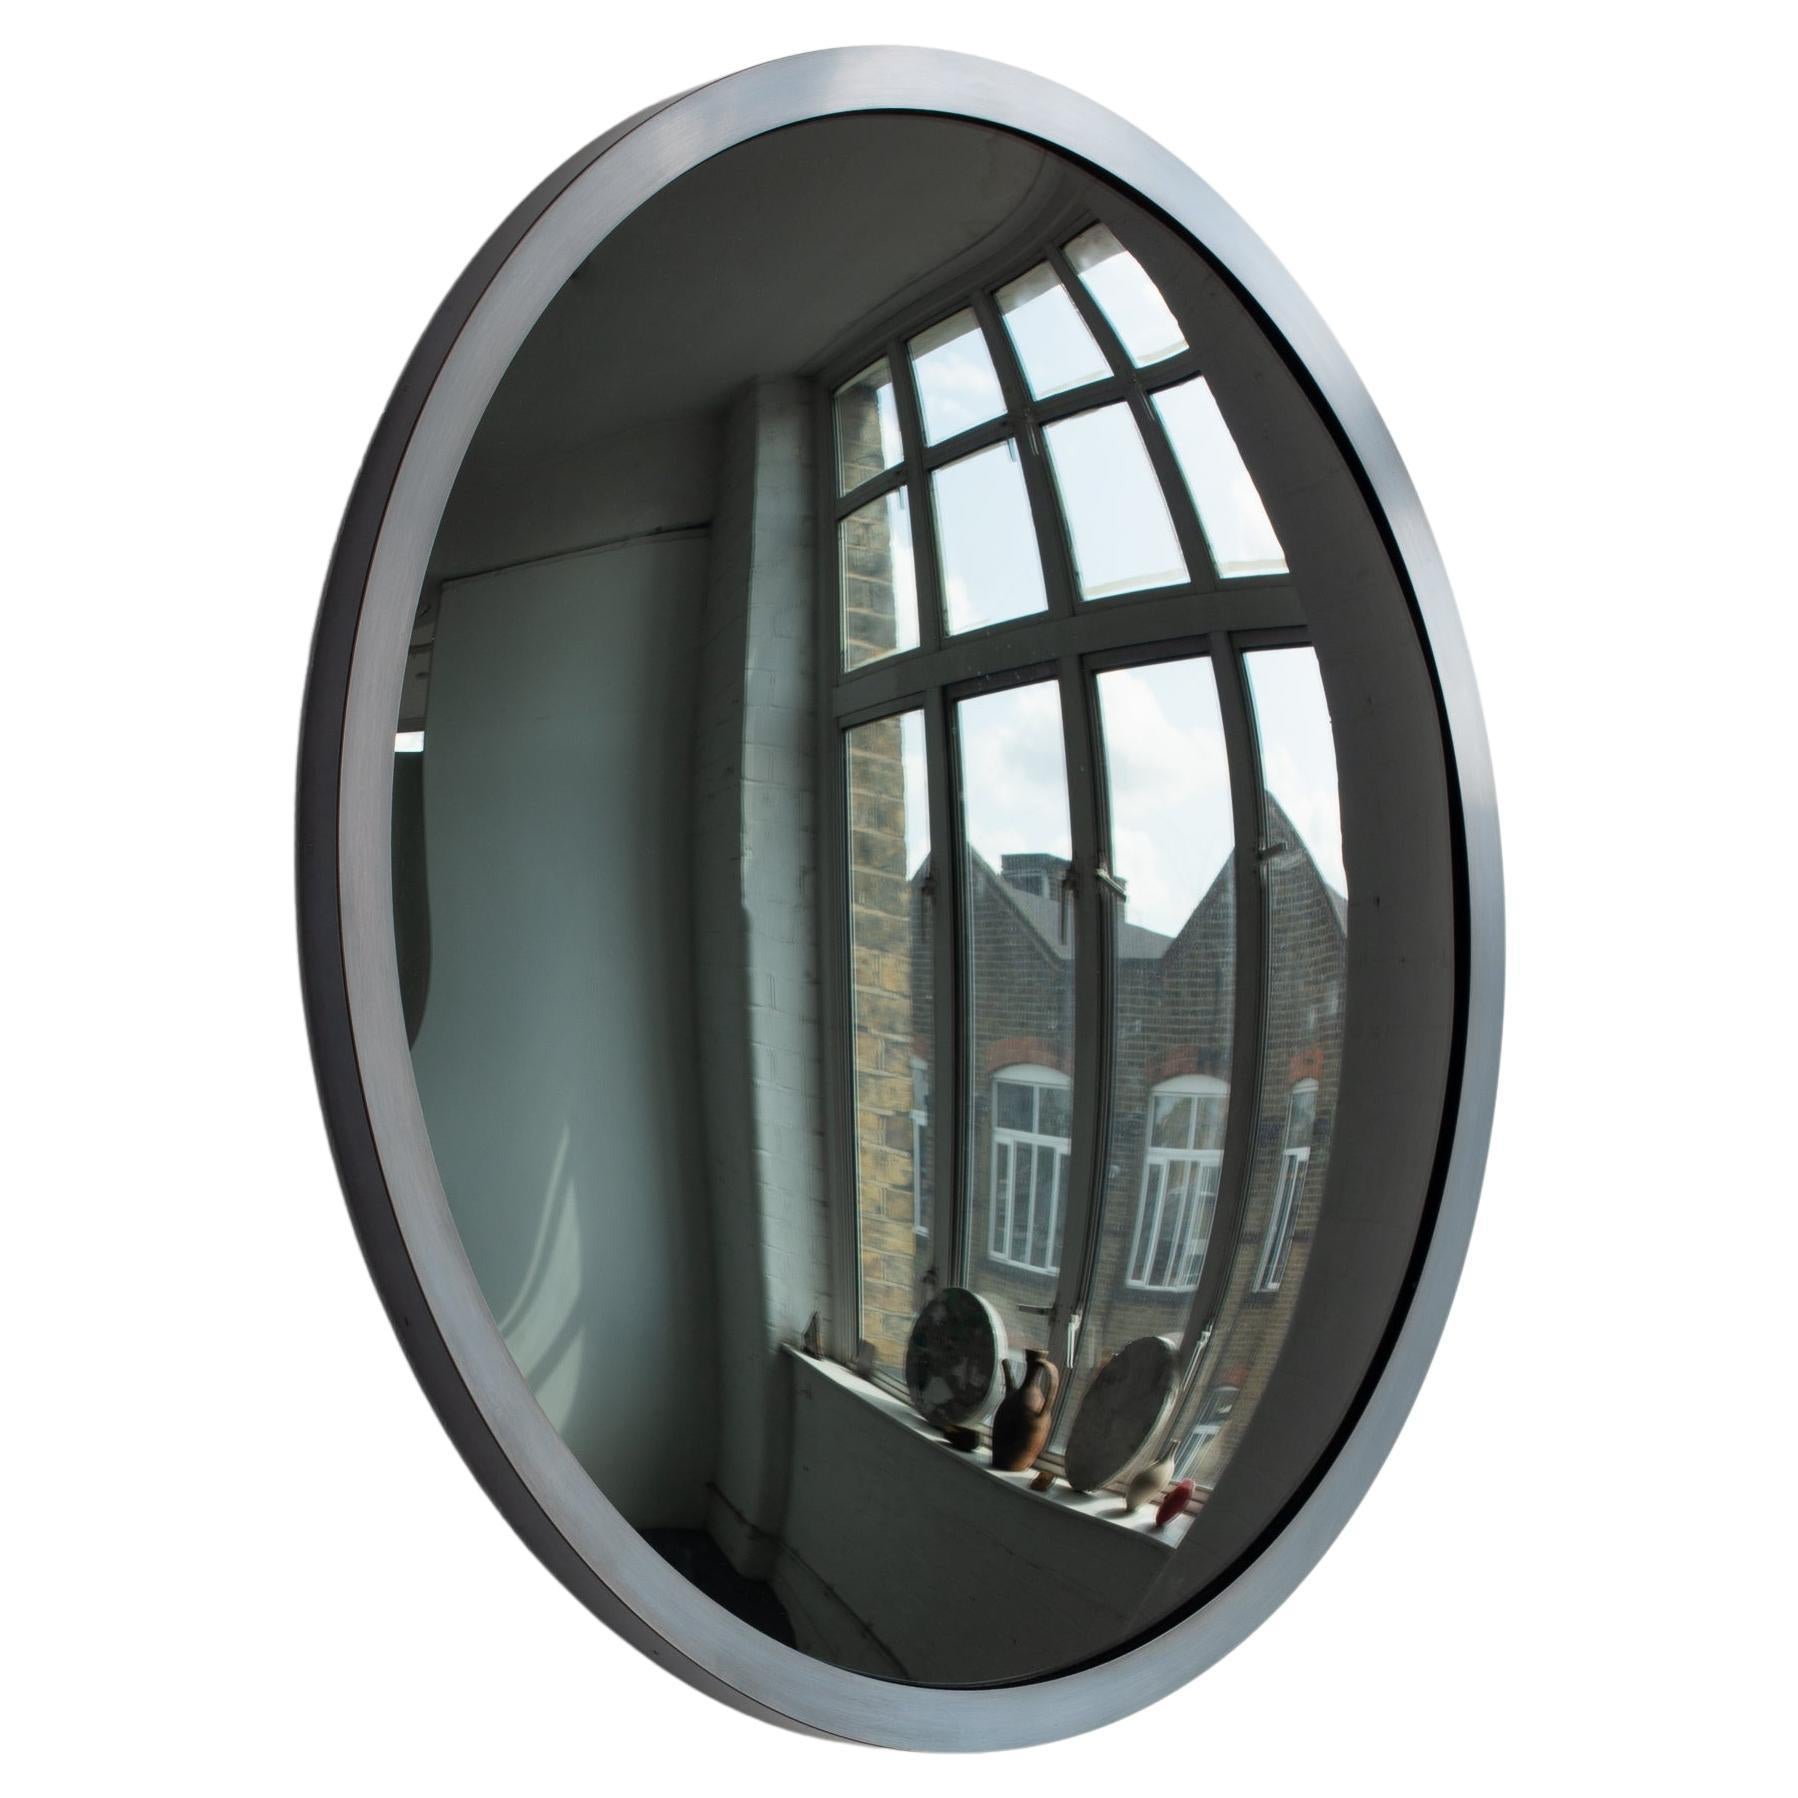 In Stock Orbis Round Black Tinted Convex Mirror, Blackened Metal Frame, Large For Sale